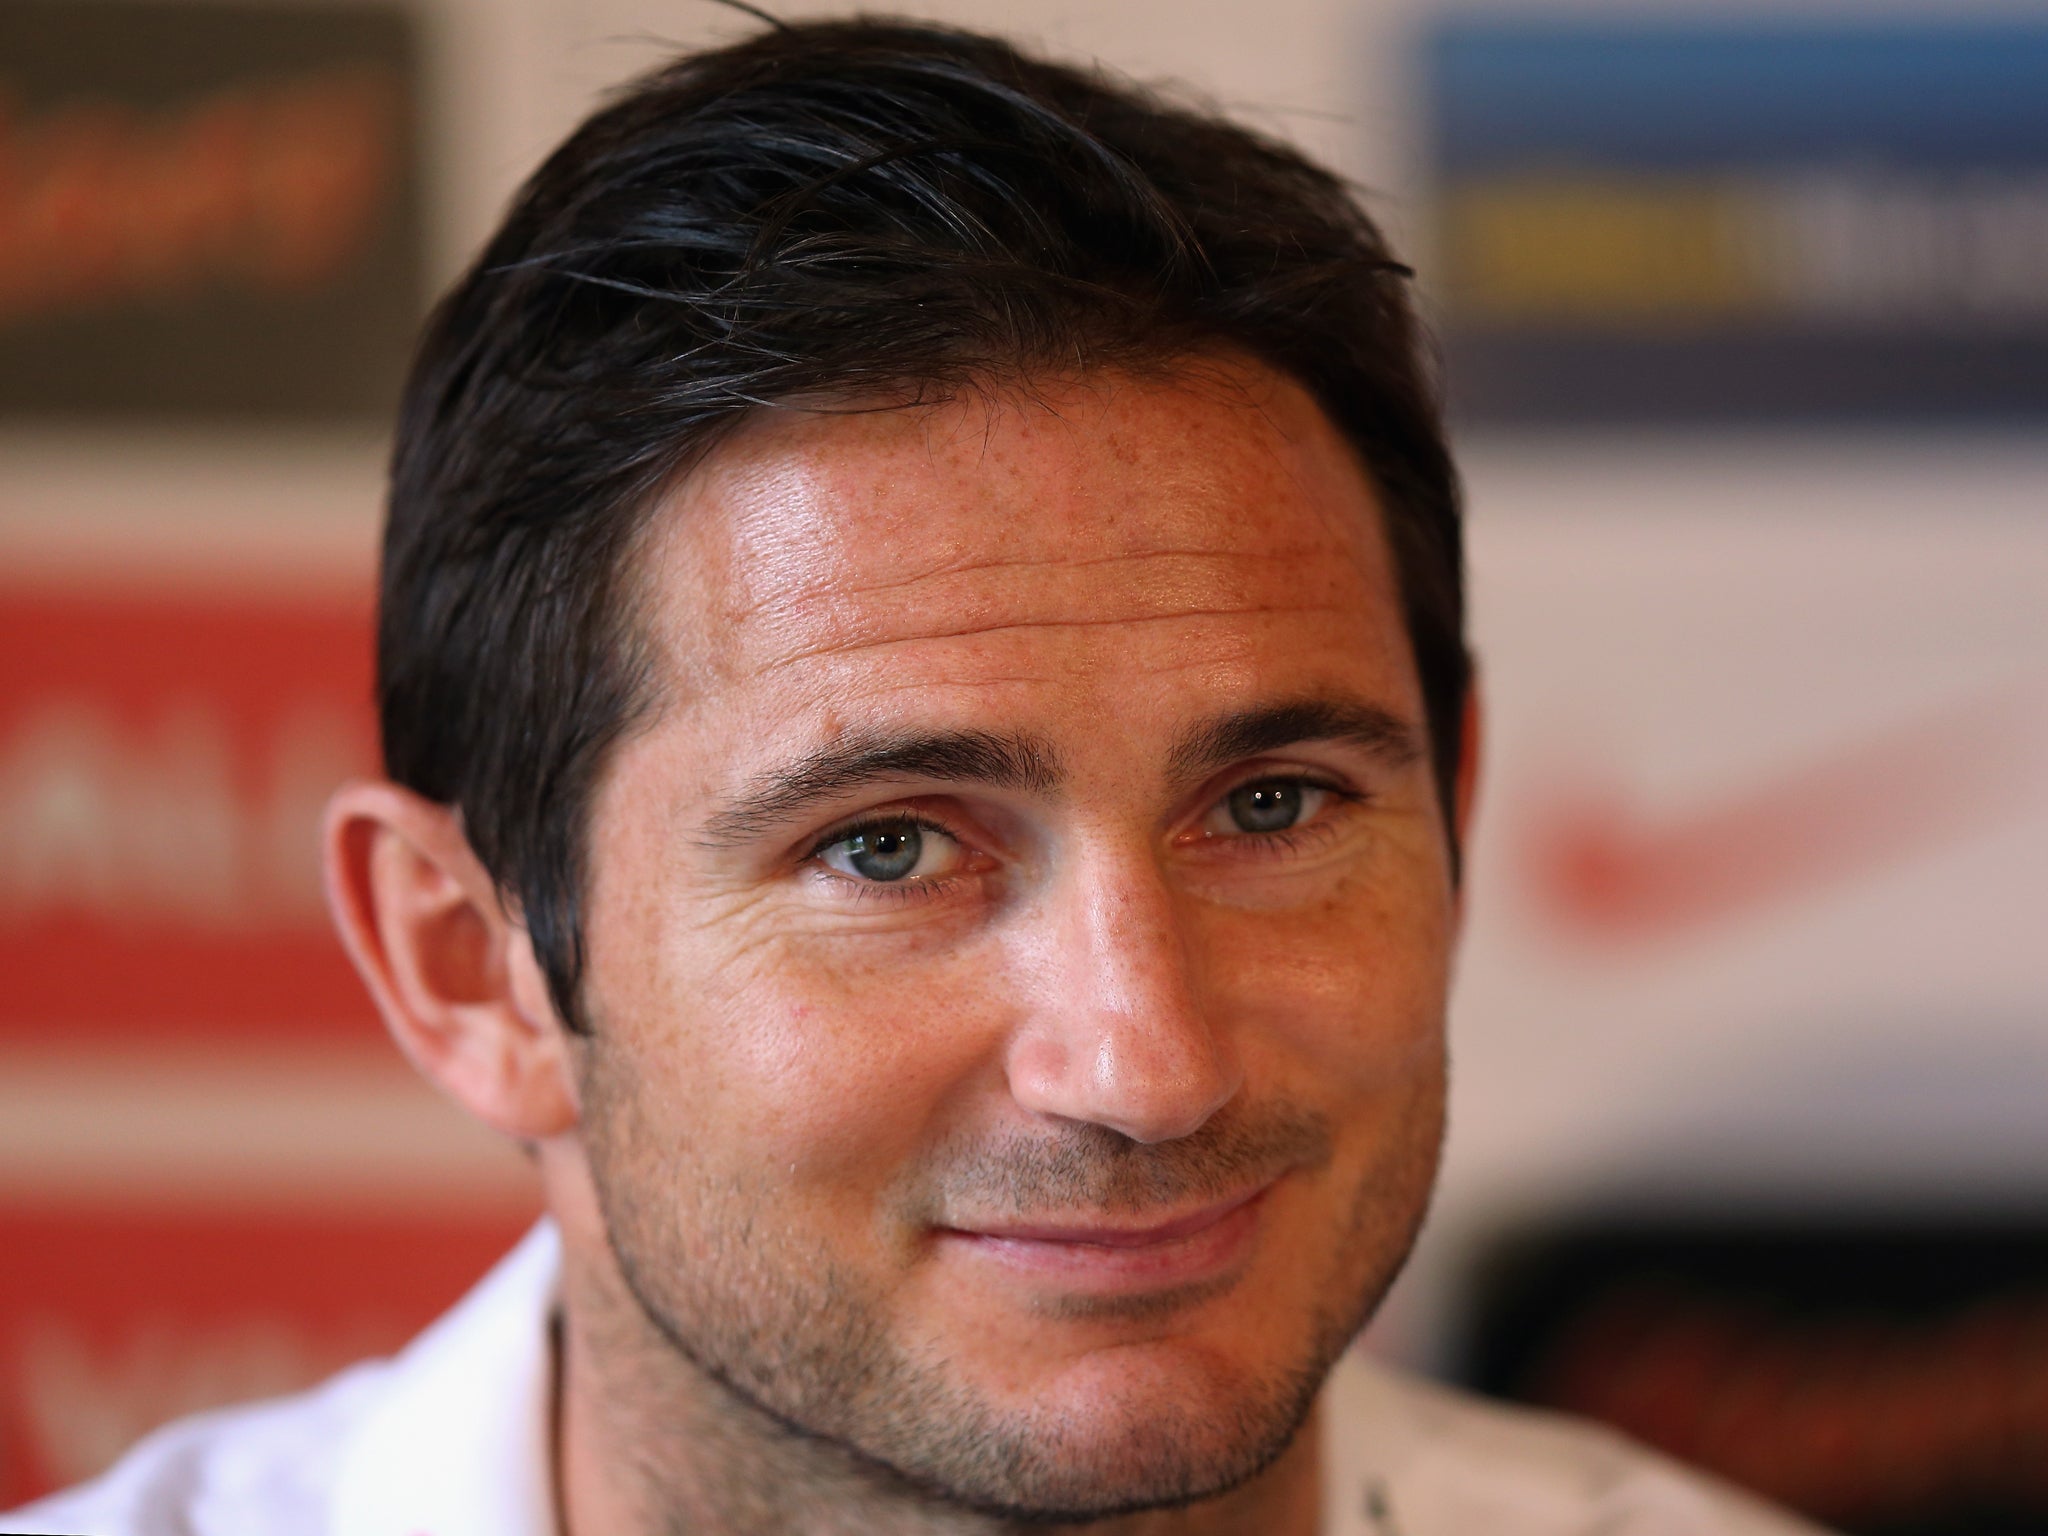 Frank Lampard could win his 100th cap for England against Ukraine on Tuesday